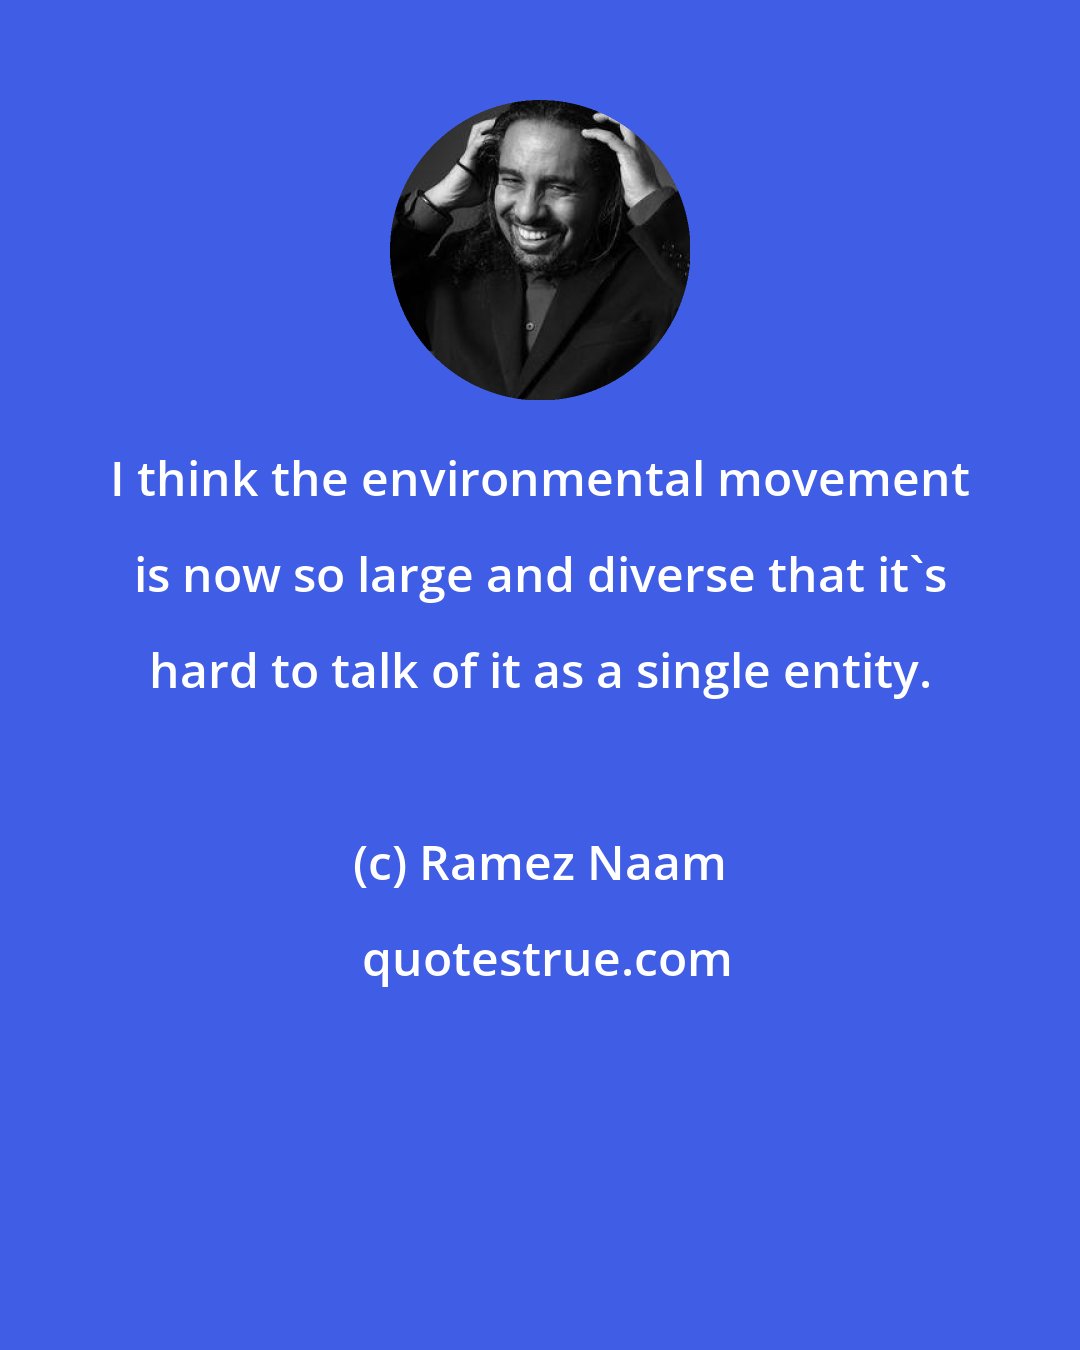 Ramez Naam: I think the environmental movement is now so large and diverse that it's hard to talk of it as a single entity.